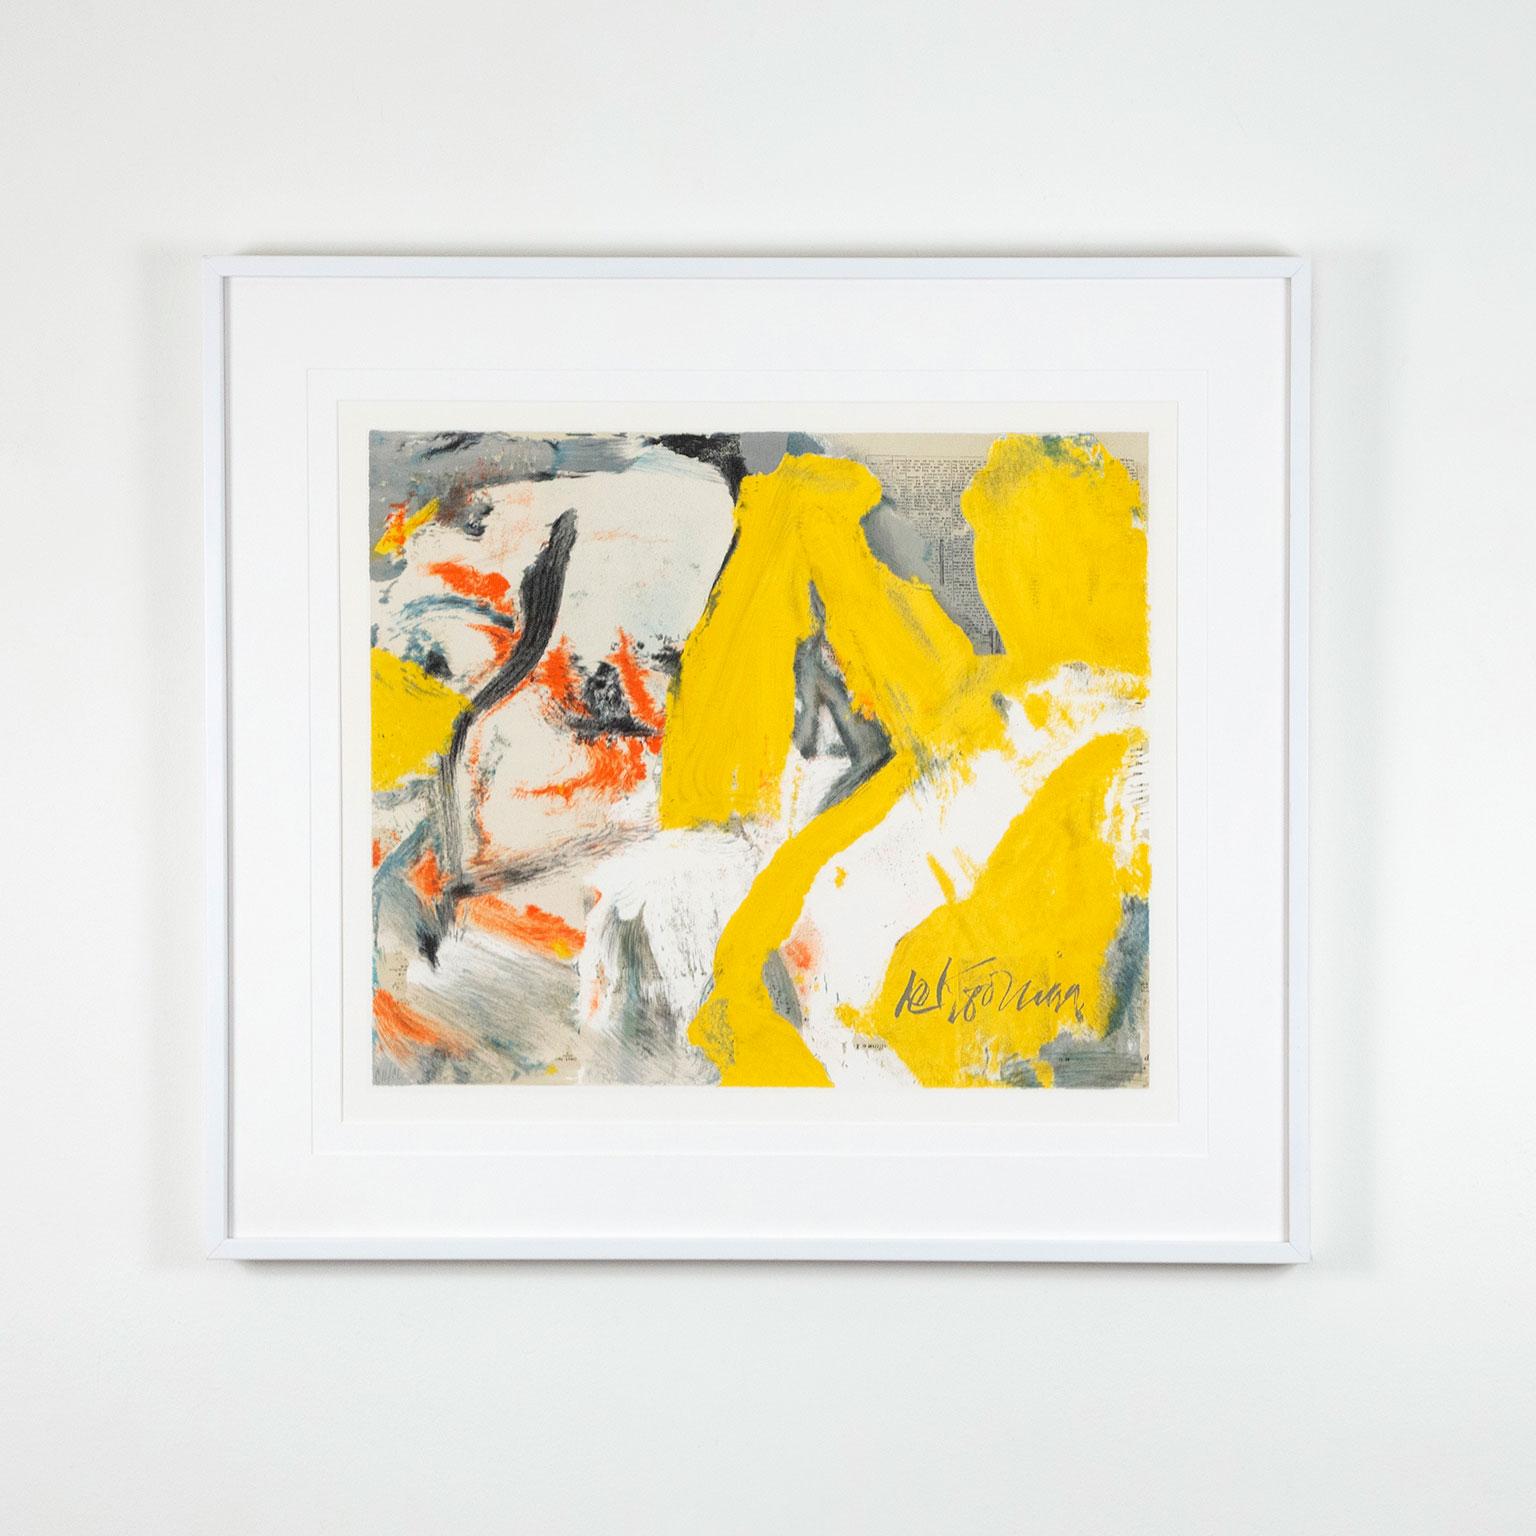 Willem de Kooning Abstract Print - The Man and the Big Blonde